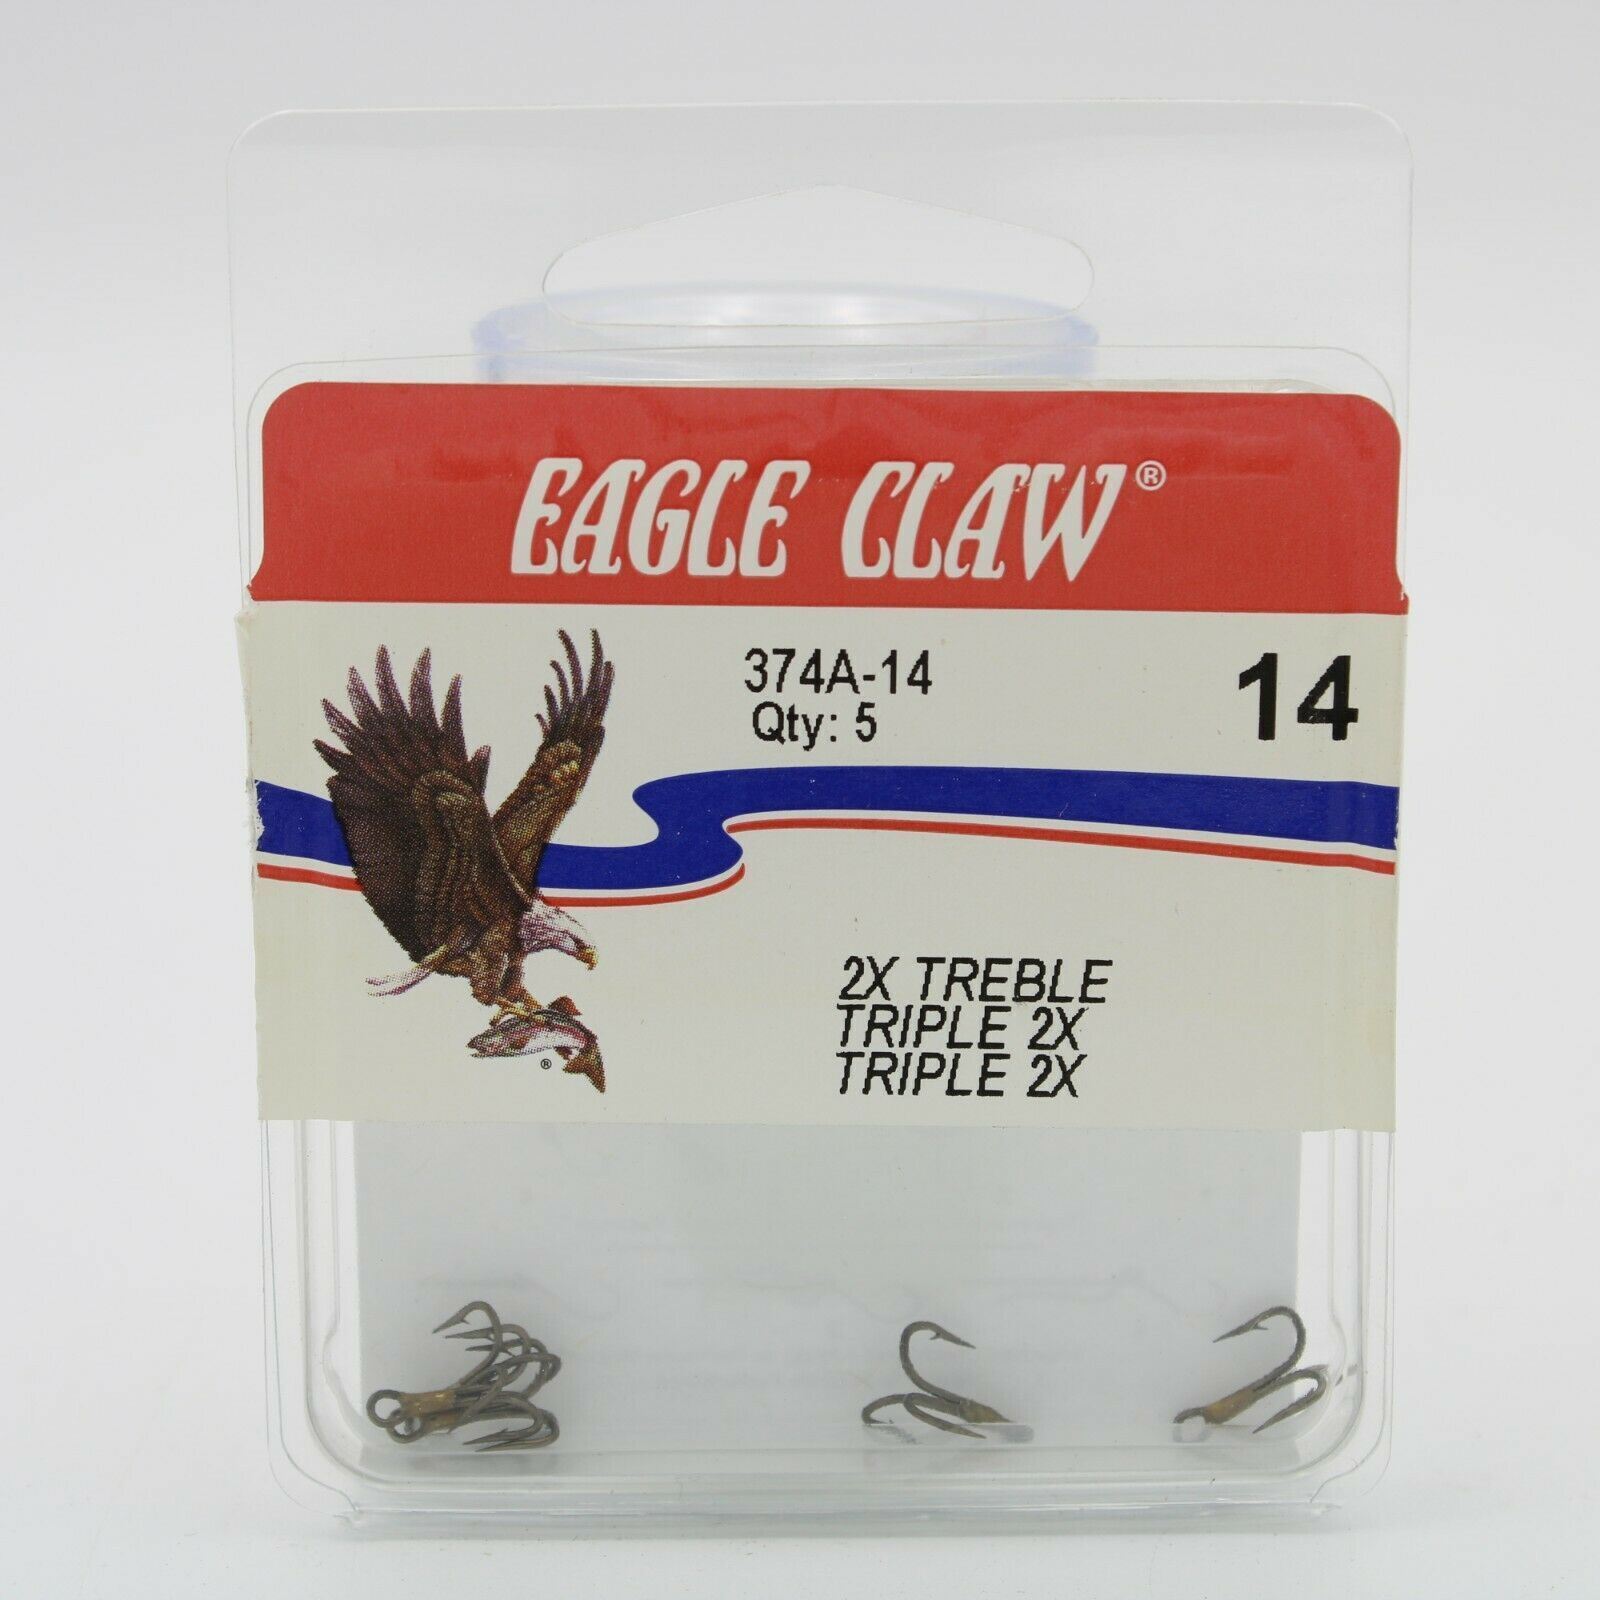 Eagle Claw 374a-16 2x Treble Regular Shank Curved Point Fishing